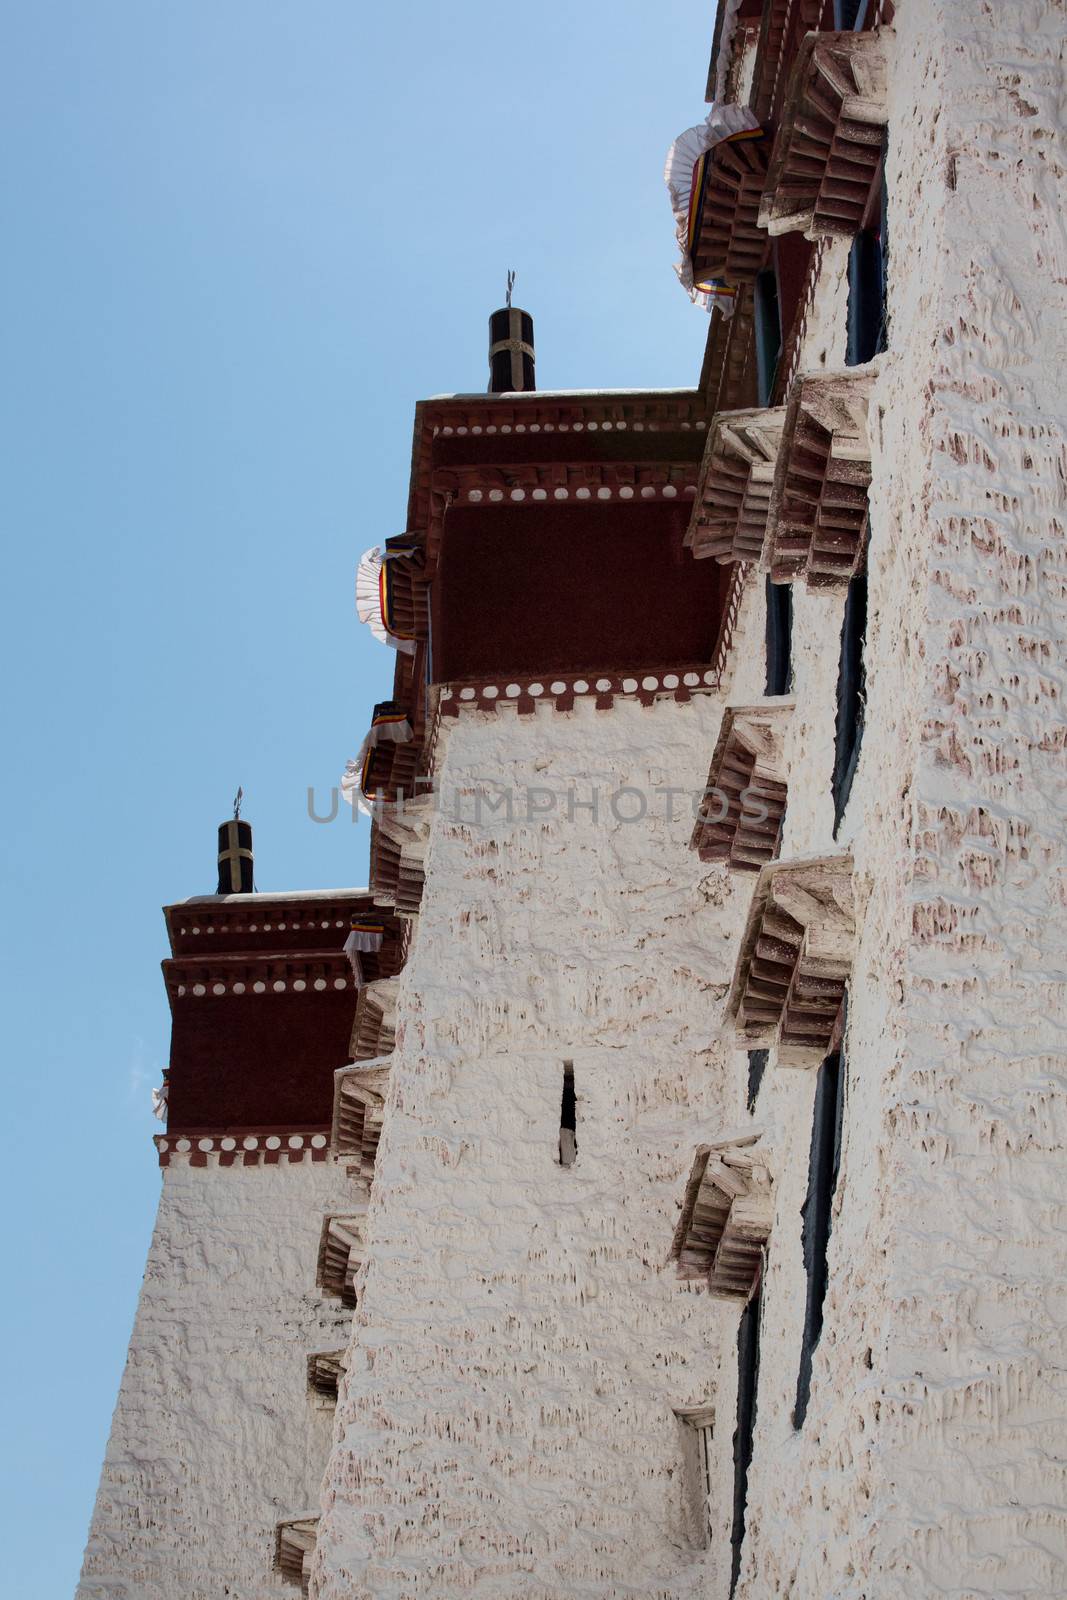 Detail of the Potala Palace in Lhasa. Historic home of the Dalai Lama. A UNESCO World Heritage site. China 2013